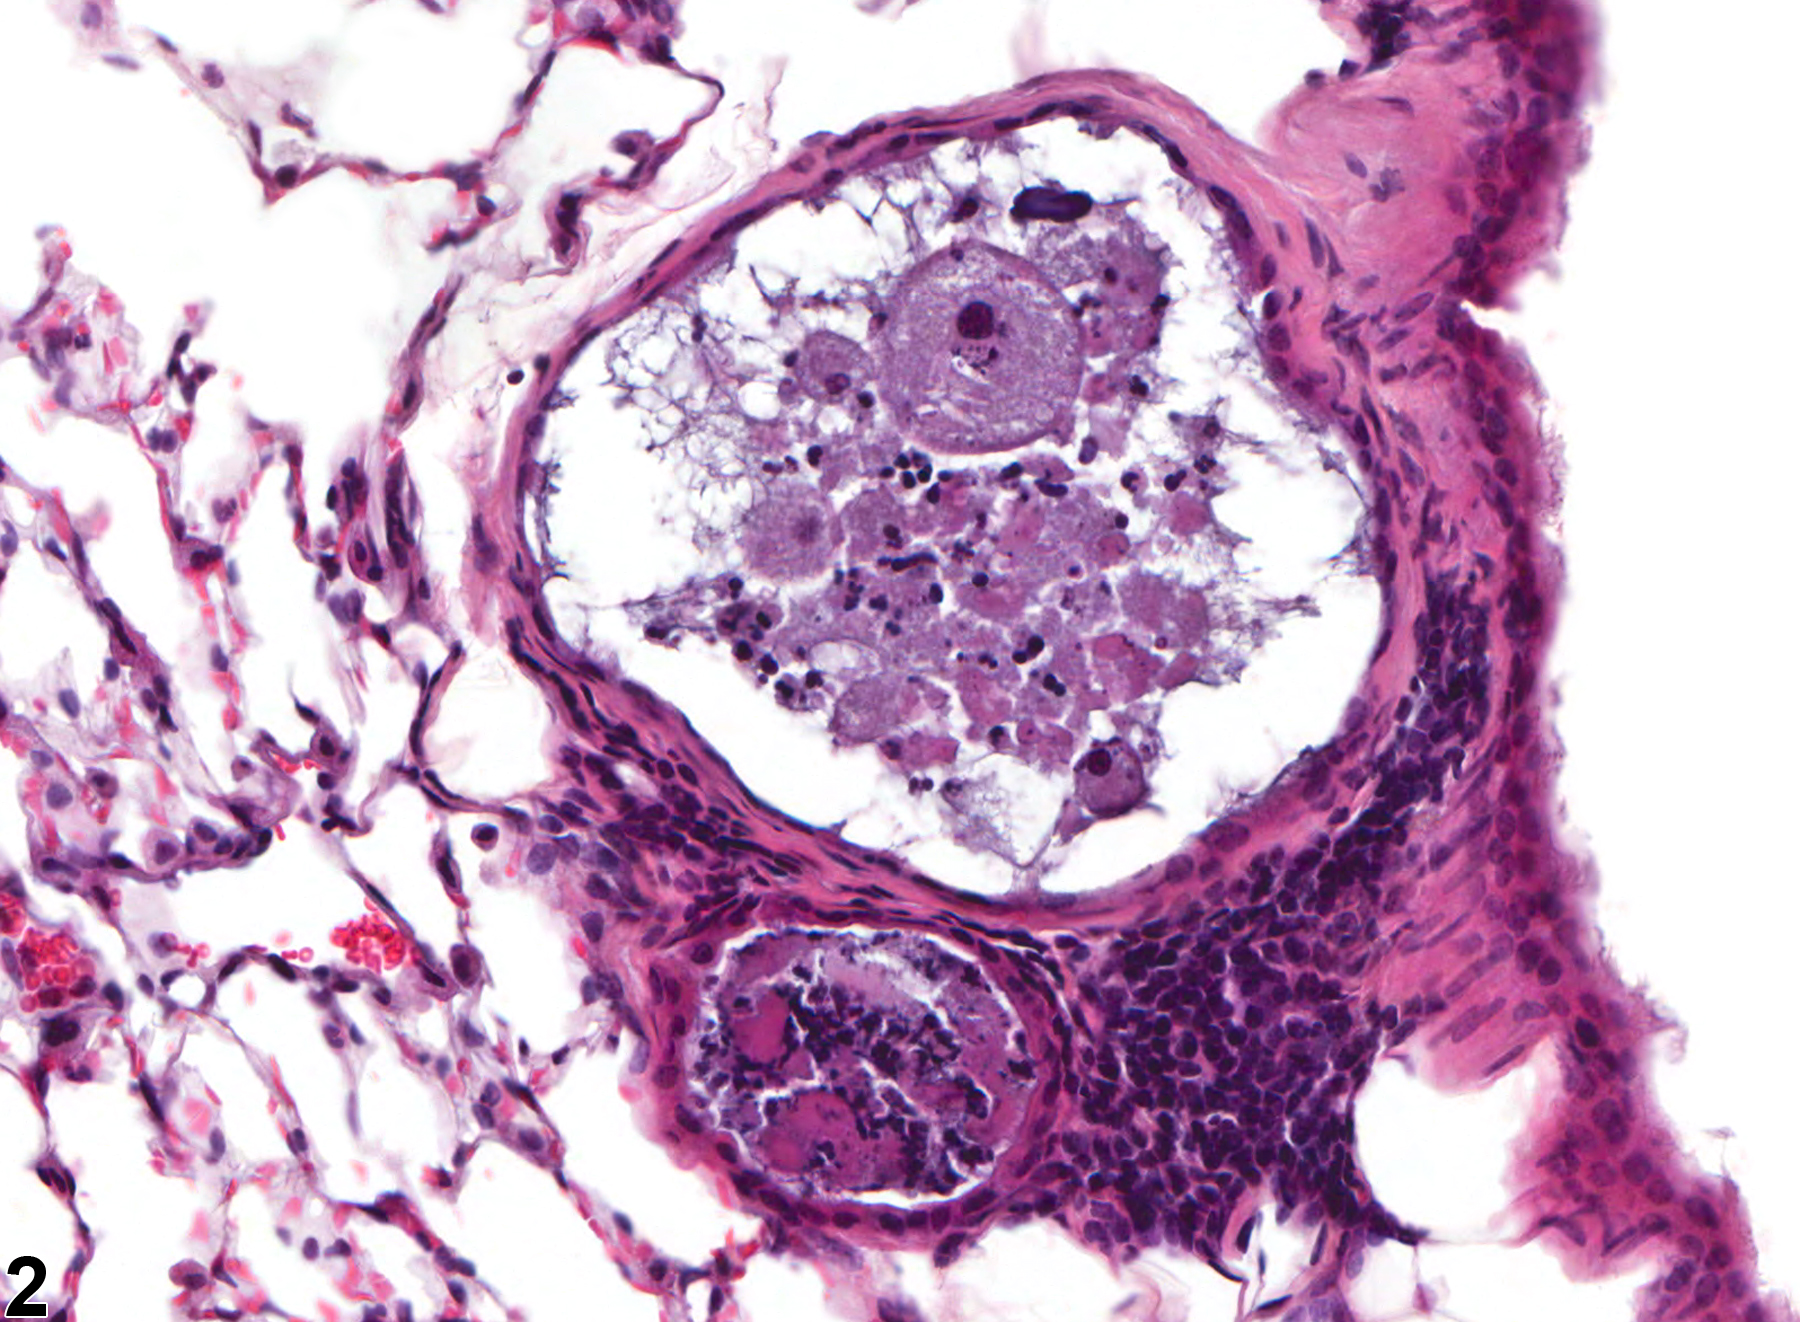 Image of glandular cyst in the lung from a male B6C3F1/N mouse in a chronic study